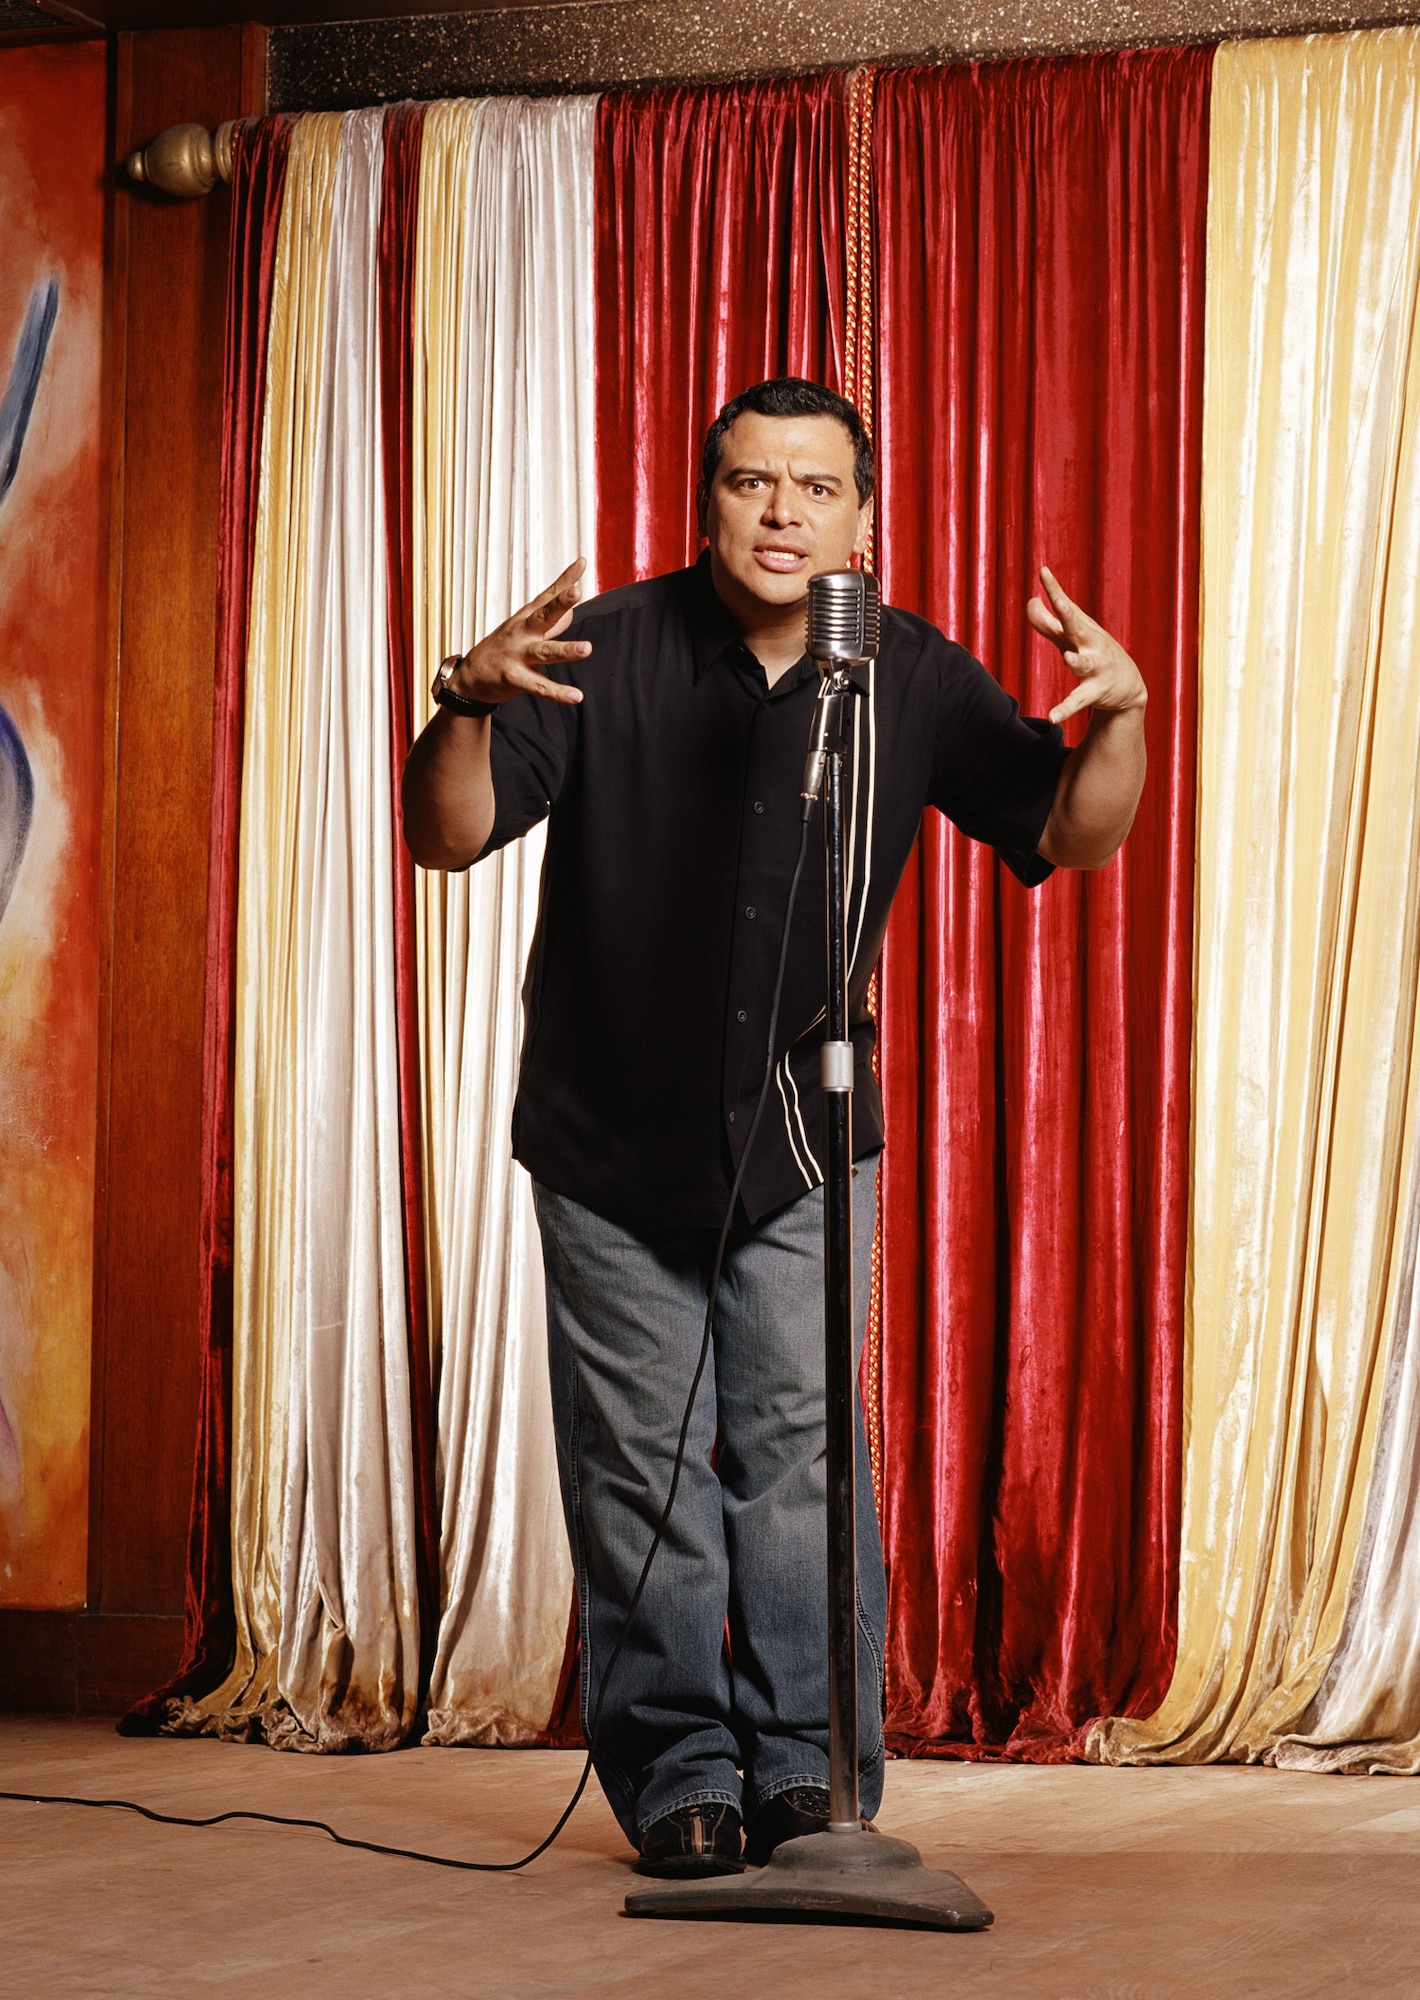 Carlos Mencia , the man behind Comedy Central's popular "Mind of Mencia" television program, will entertain American troops in Southwest Asia and families in Europe Nov. 30 to Dec. 12 as part of this year's Tour for the Troops, formerly known as Operation Season's Greetings. Joining the popular comedian will be headliner Kid Rock, singer/songwriter Jessie James and members of the Band of the Air Force Reserve. Tour for the Troops will feature performances at Ramstein Air Base, Germany; Incirlik AB, Turkey; RAF Lakenheath, England; and a number of deployed locations in Southwest Asia. (Courtesy photo)